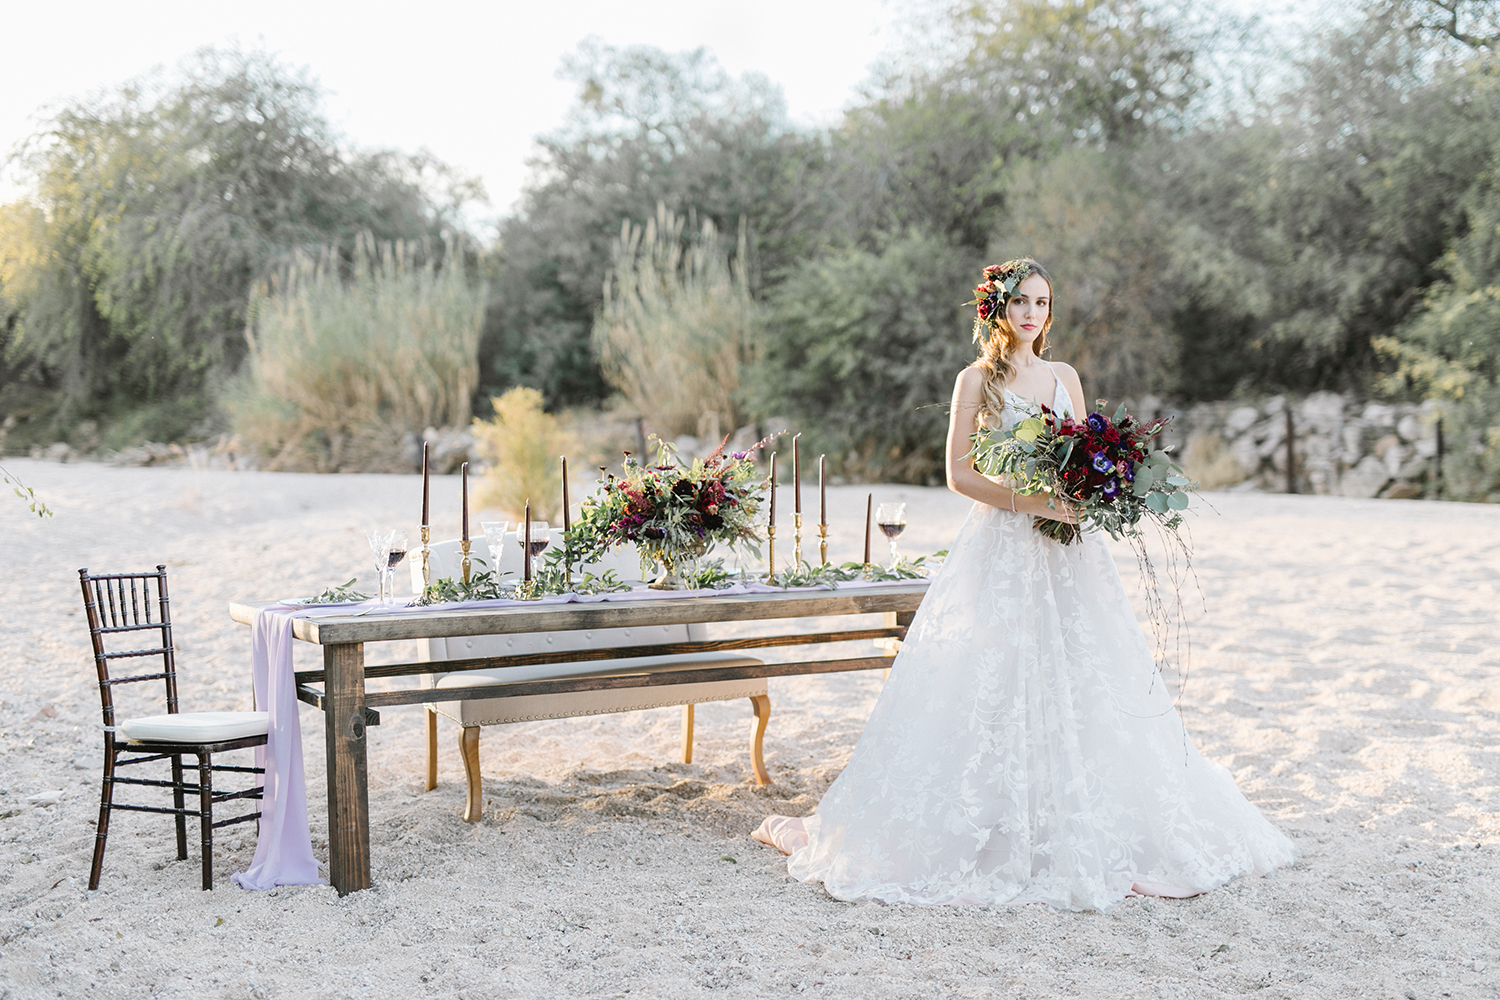 A bride and her horse. Beautiful styling by Rackel Gehlsen Weddings, Alexis Grace Florals, I Do Hair Makeup and Artistry, Raemie Reyes Makeup, J Bridal Boutique, and Hayley Paige #ArizonaWedding #ArizonaWeddingIdeas #ArizonaWeddingPhotography #WeddingIdeas #WeddingDecorations #WeddingDress #DesertWedding #DesertPhotoshoot #DesertEditorial #WeddingFlowerArrangements #WeddingHorsePictures #BrideHair #BrideHairStyleIdeas